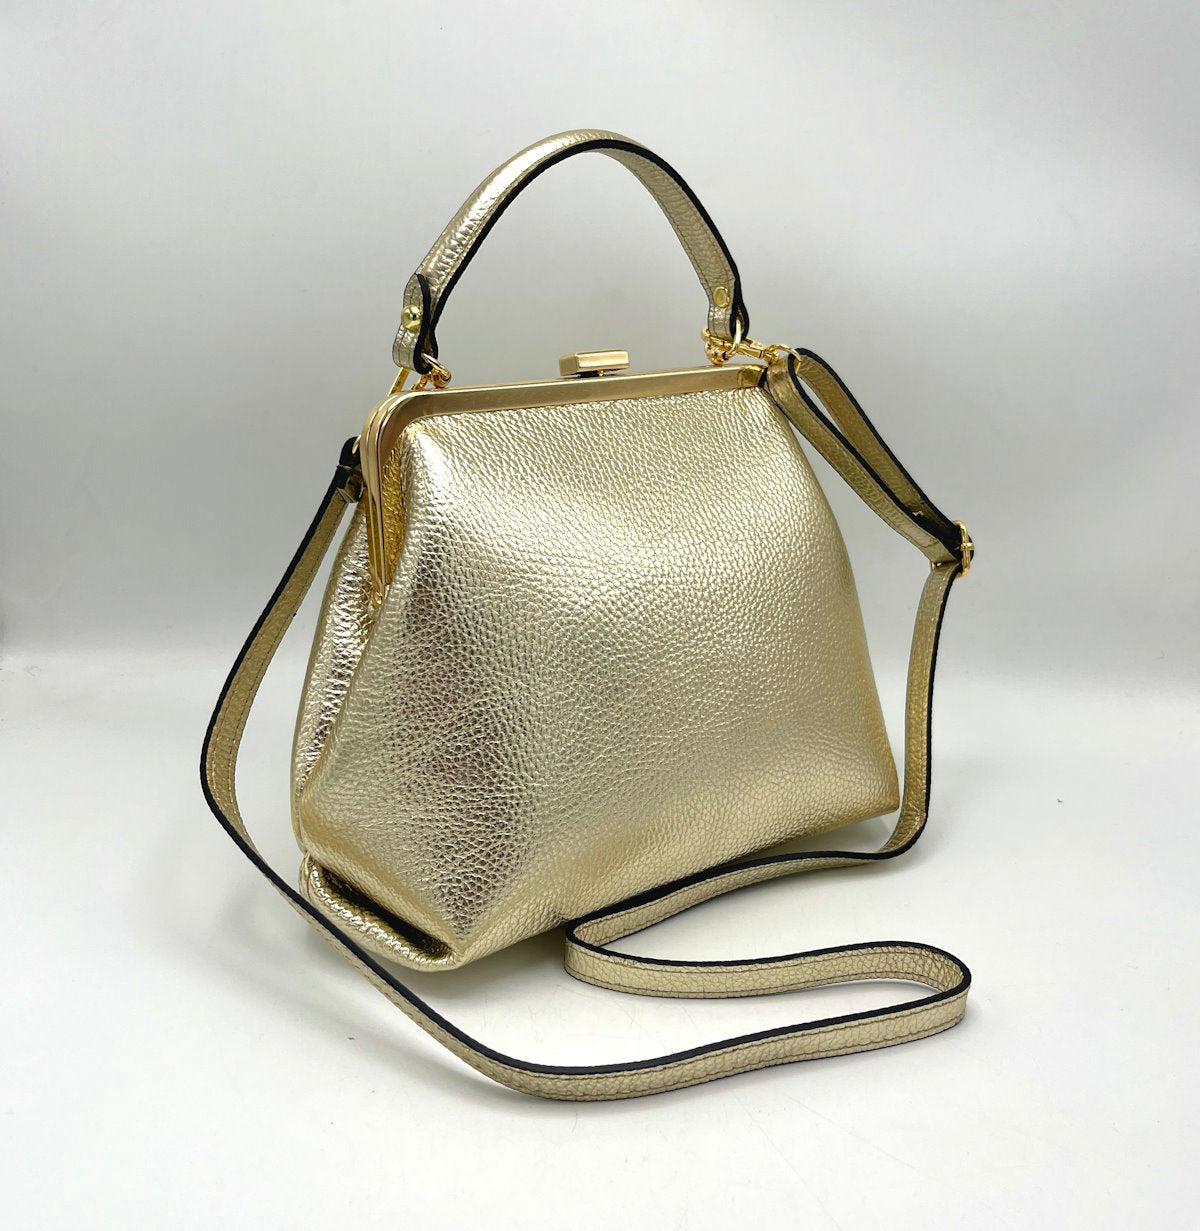 Genuine leather top handle bag, Made in Italy, art. 112463/LA